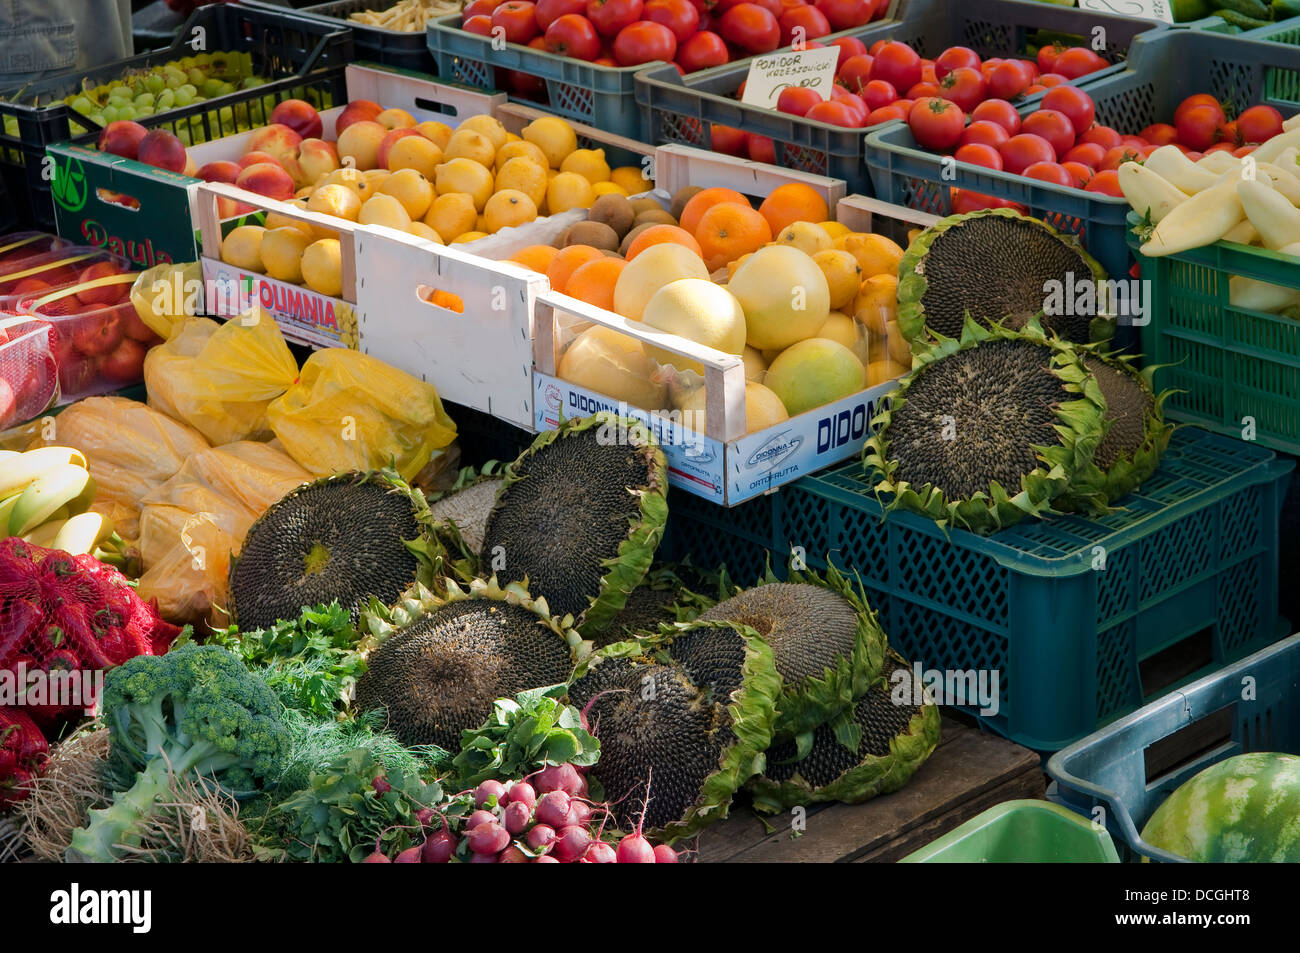 Greengrocer's stall at farmers market in Wadowice, Poland. Stock Photo